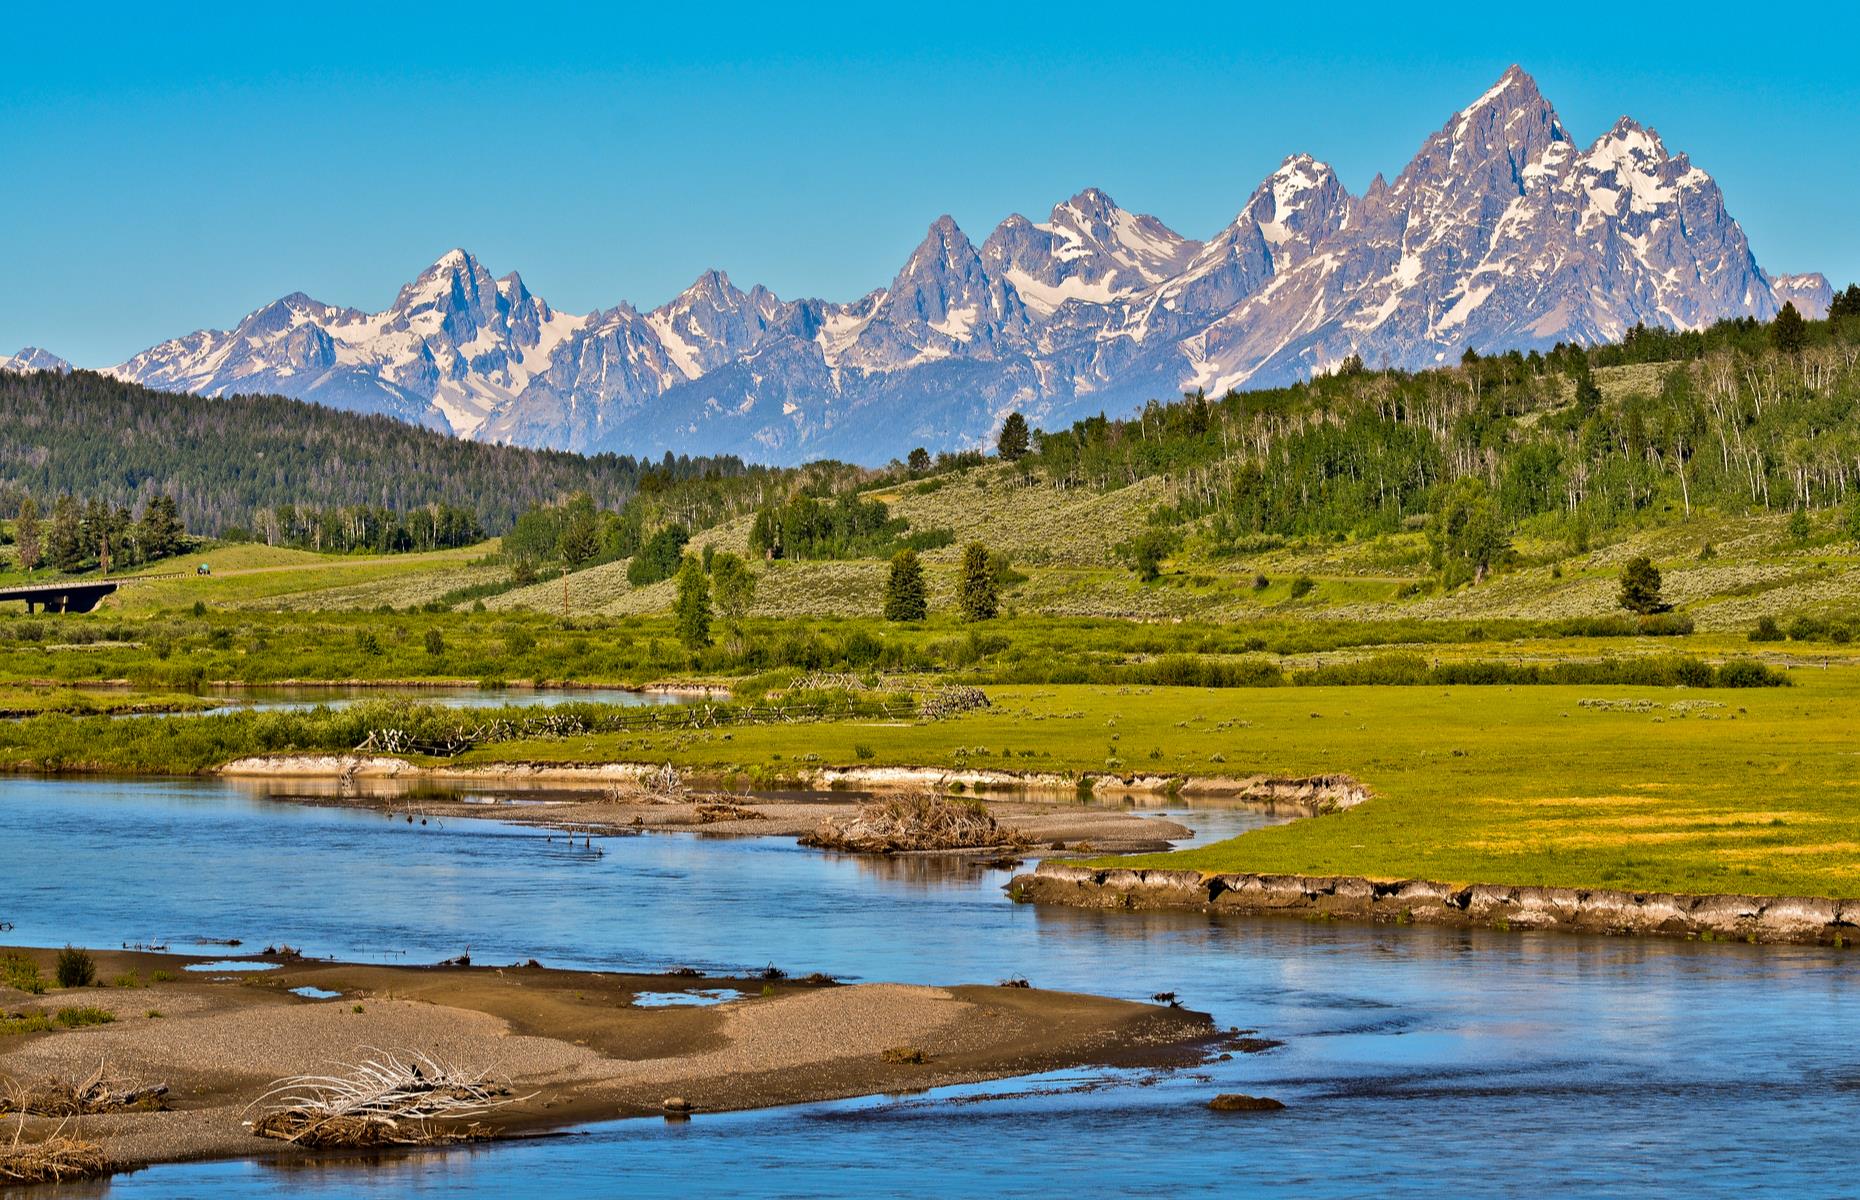 Slide 13 of 32: The vast landscape of Grand Teton National Park is etched with snow-capped mountains, woodland and crystalline lakes. The highlight of the dramatic scenery is the Teton mountain range, of which the park's namesake Grand Teton is the highest.